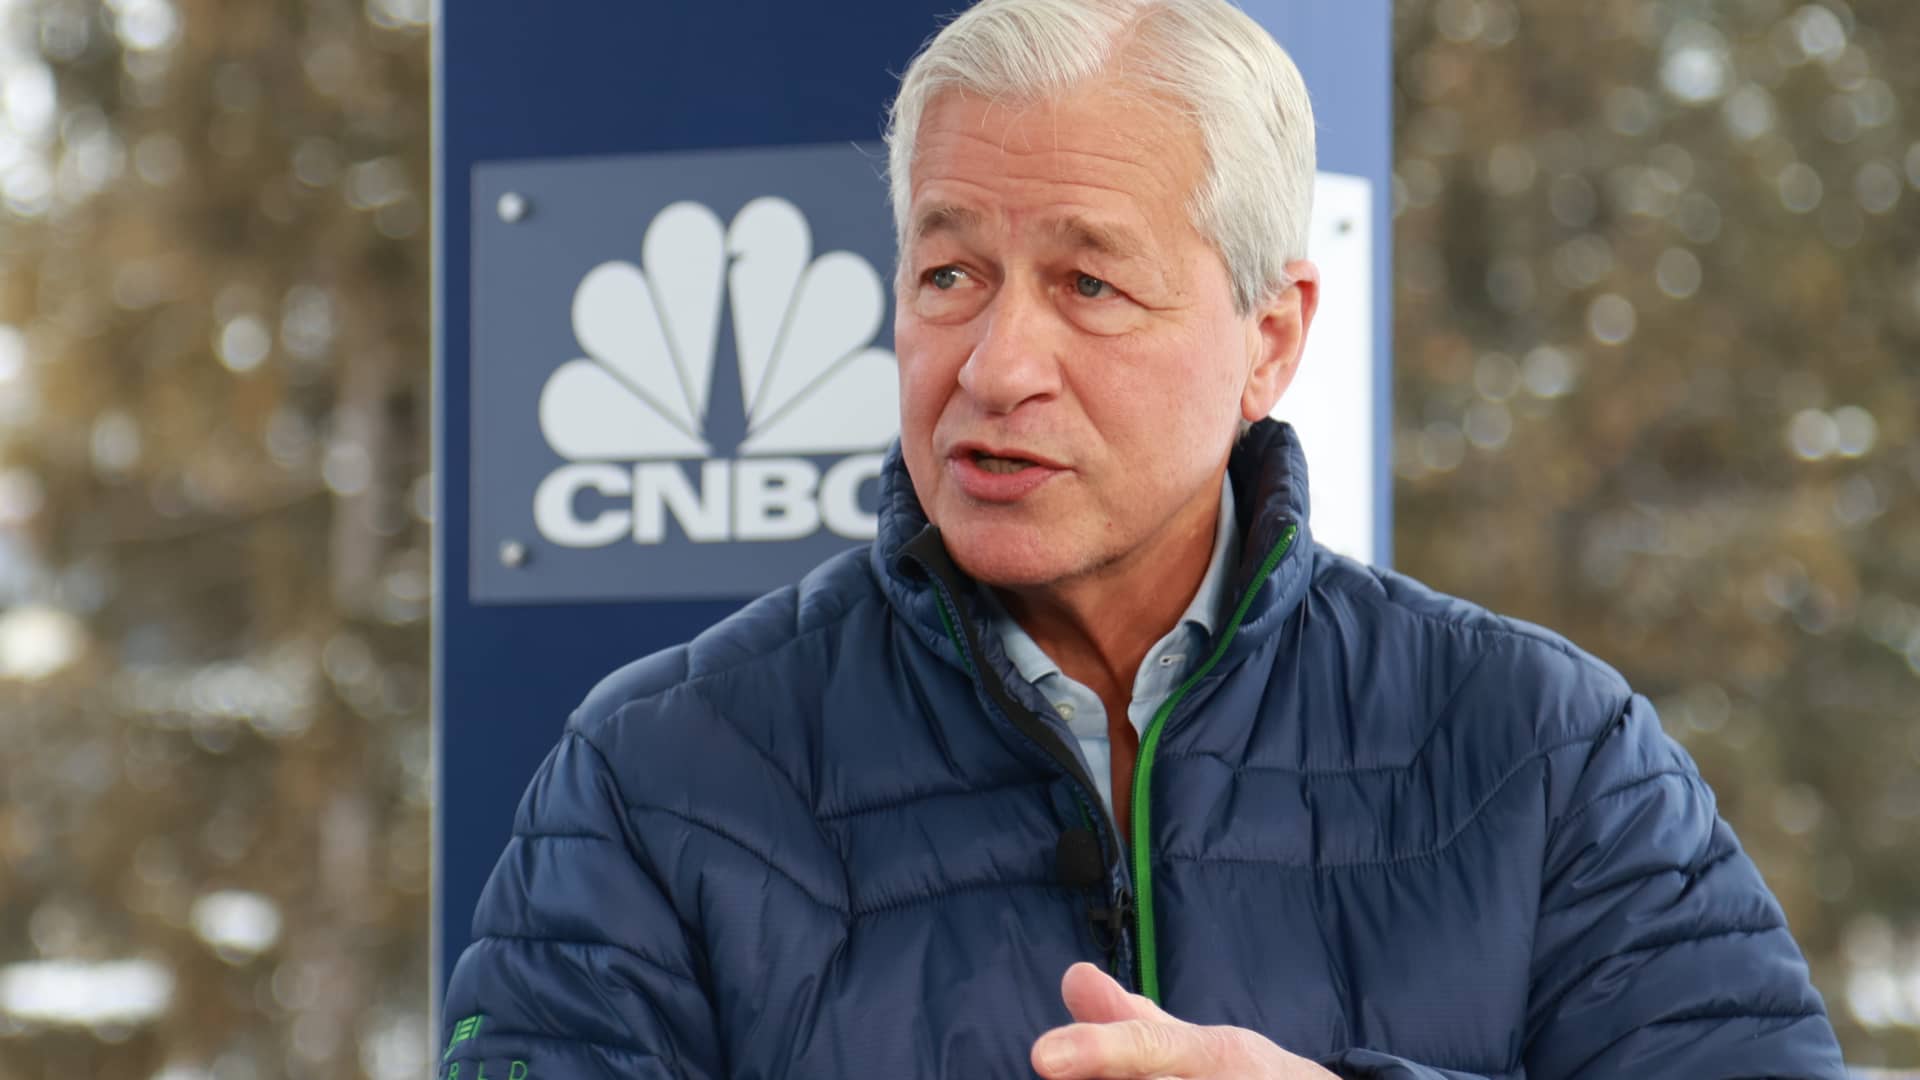 Jamie Dimon says rates will rise above 5% because there is still 'a lot of underlying inflation'